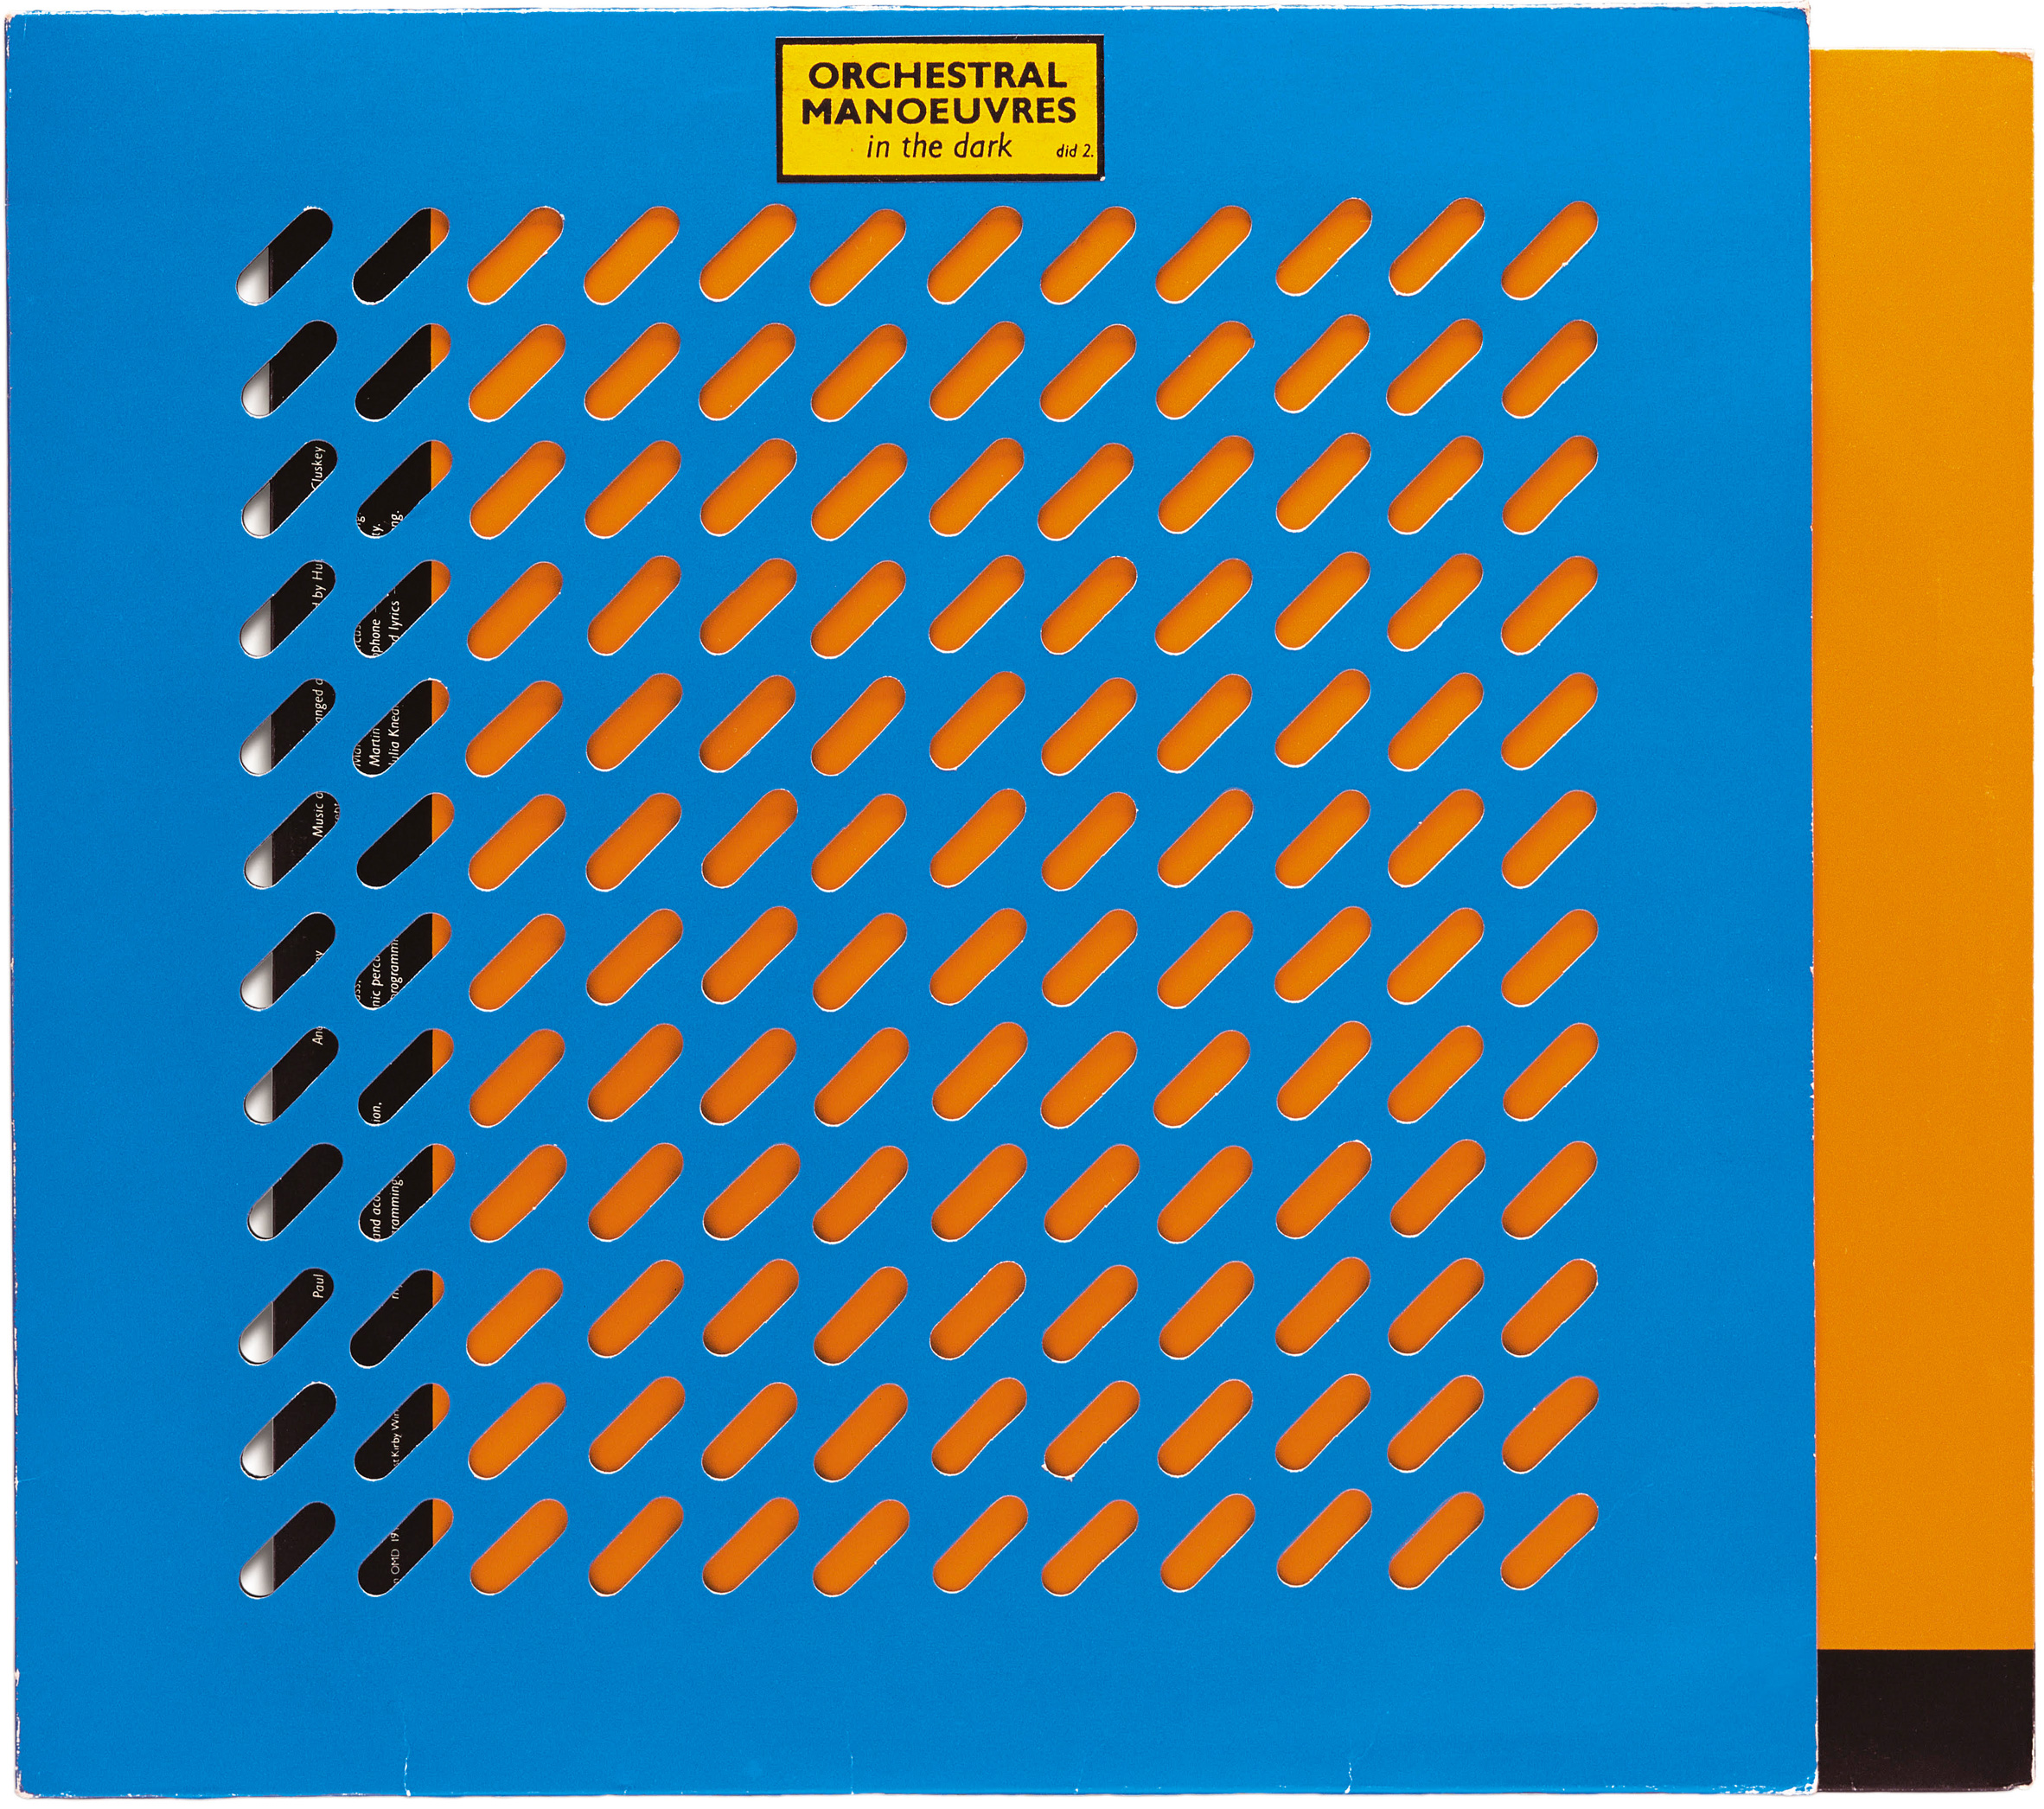 Orchestral Manoeuvres album cover